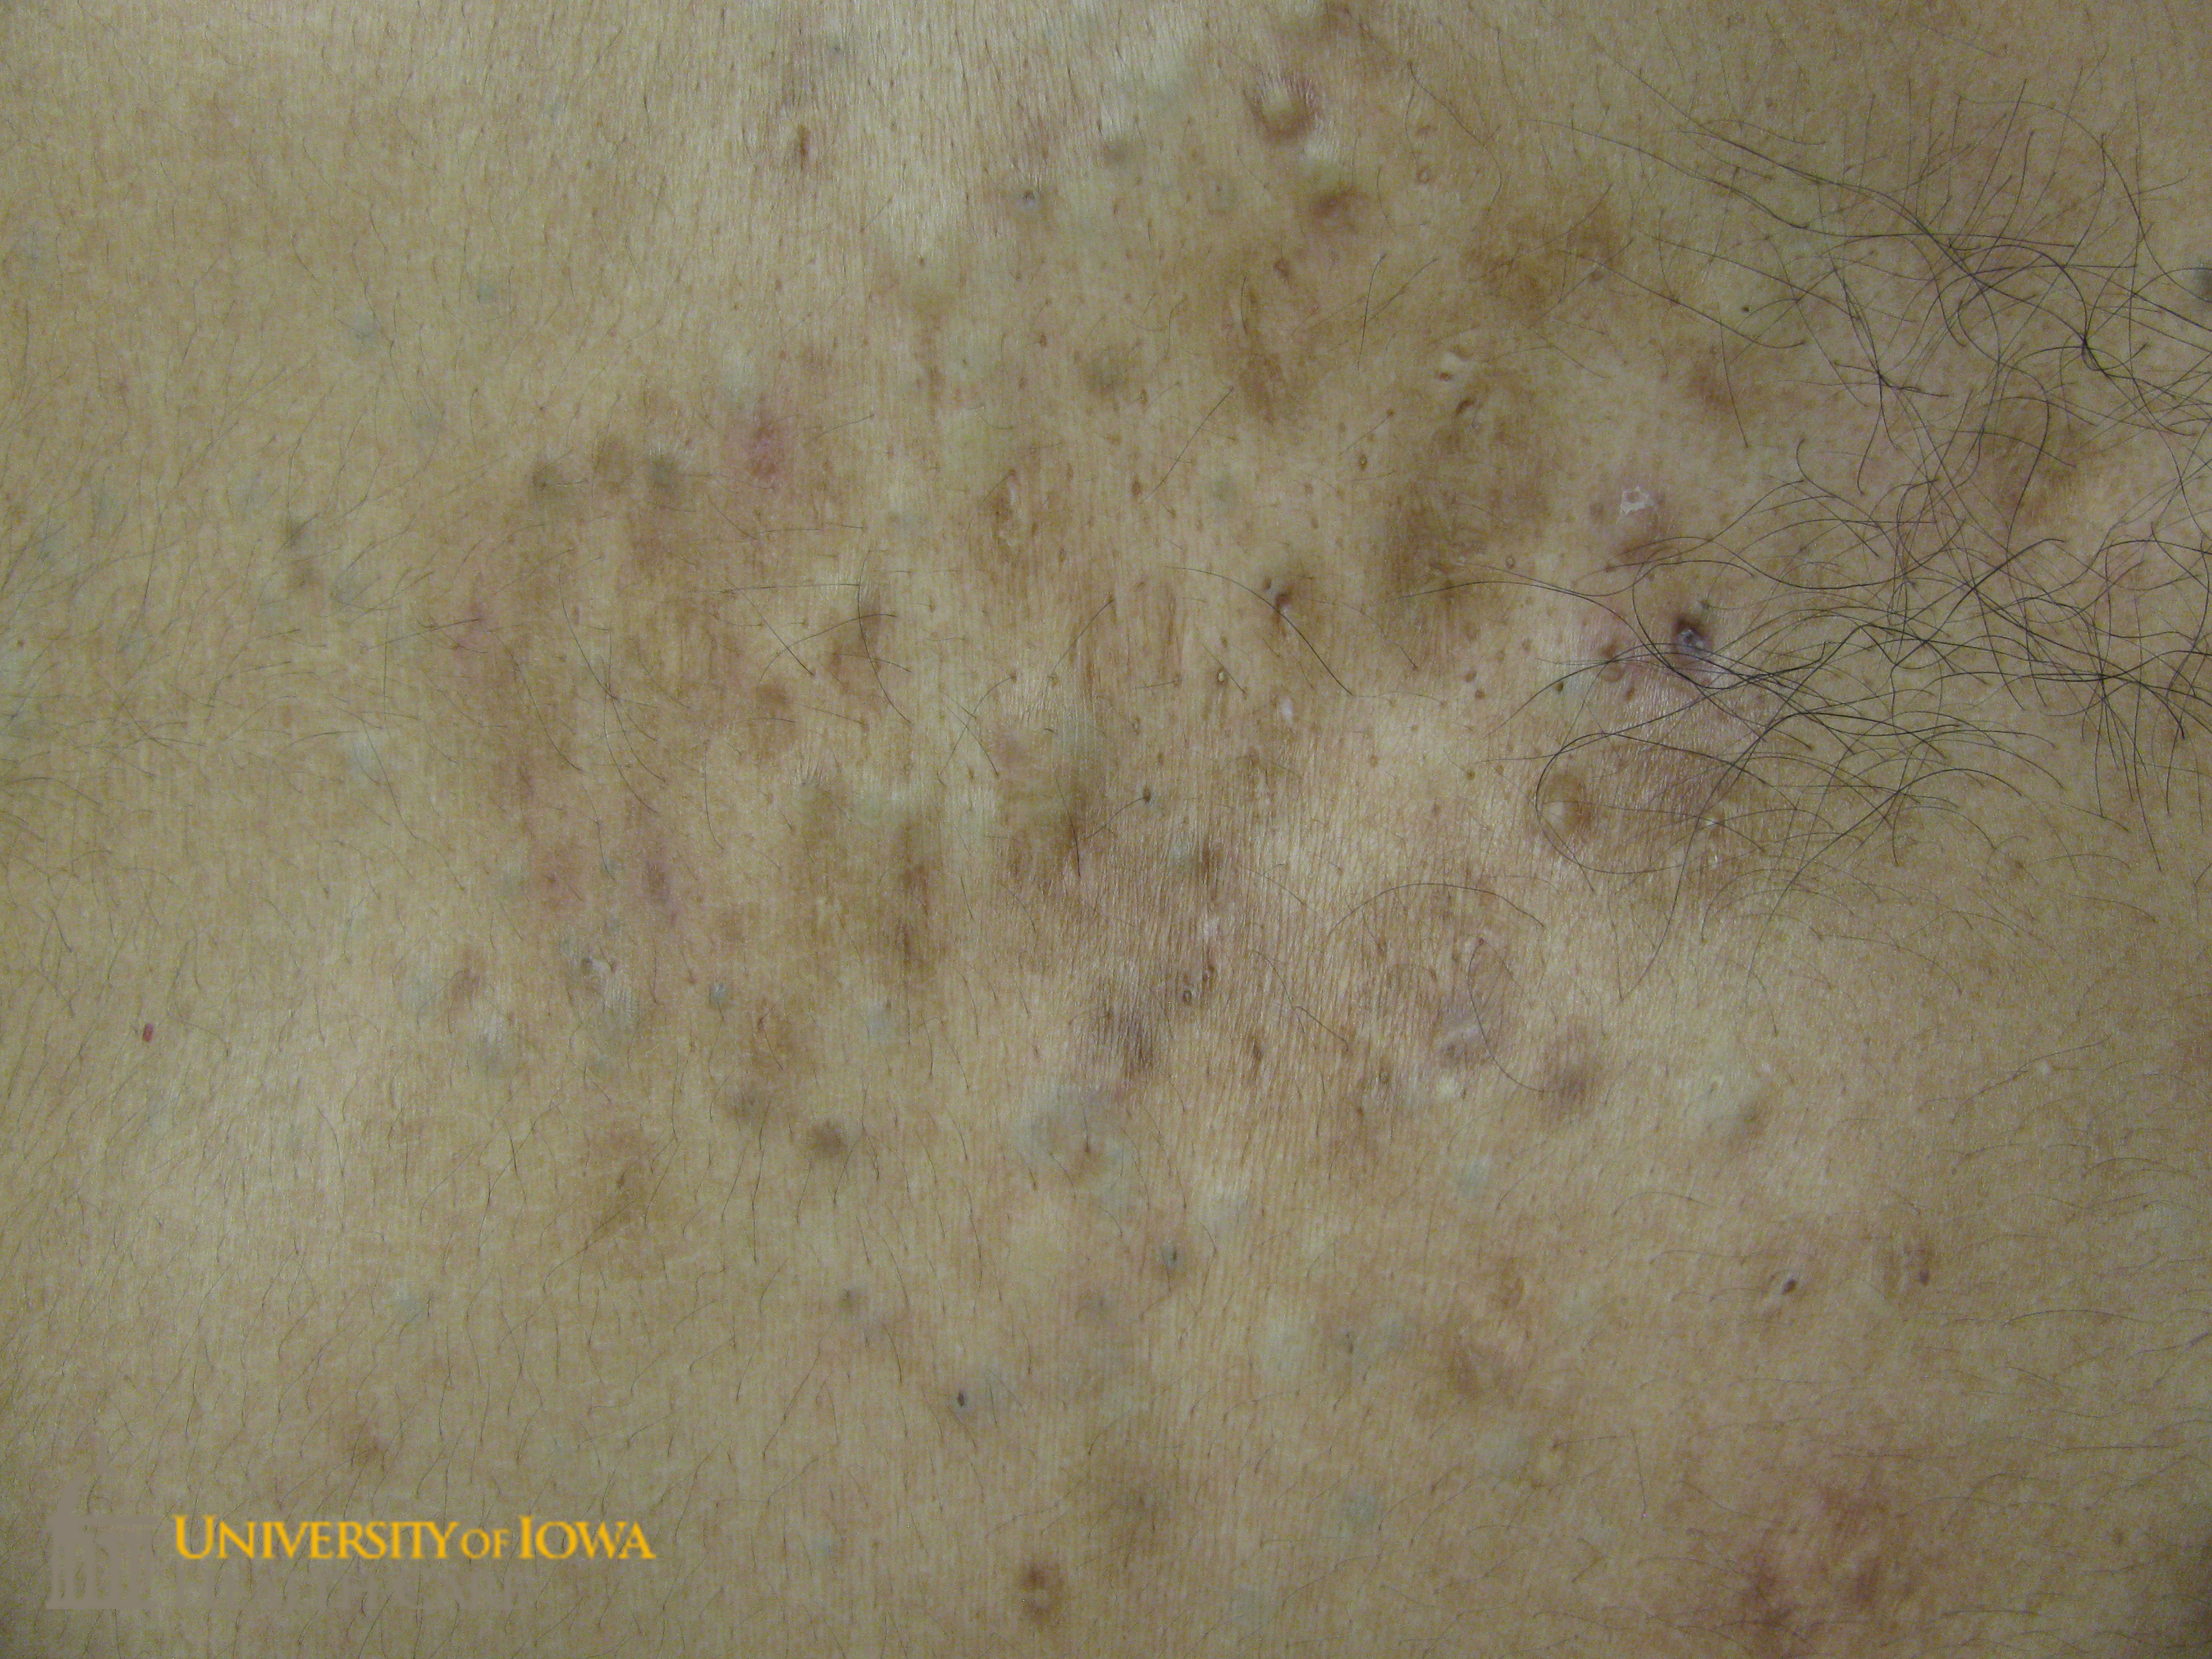 Multiple gray, brown, and skin-colored papules on the chest. (click images for higher resolution).